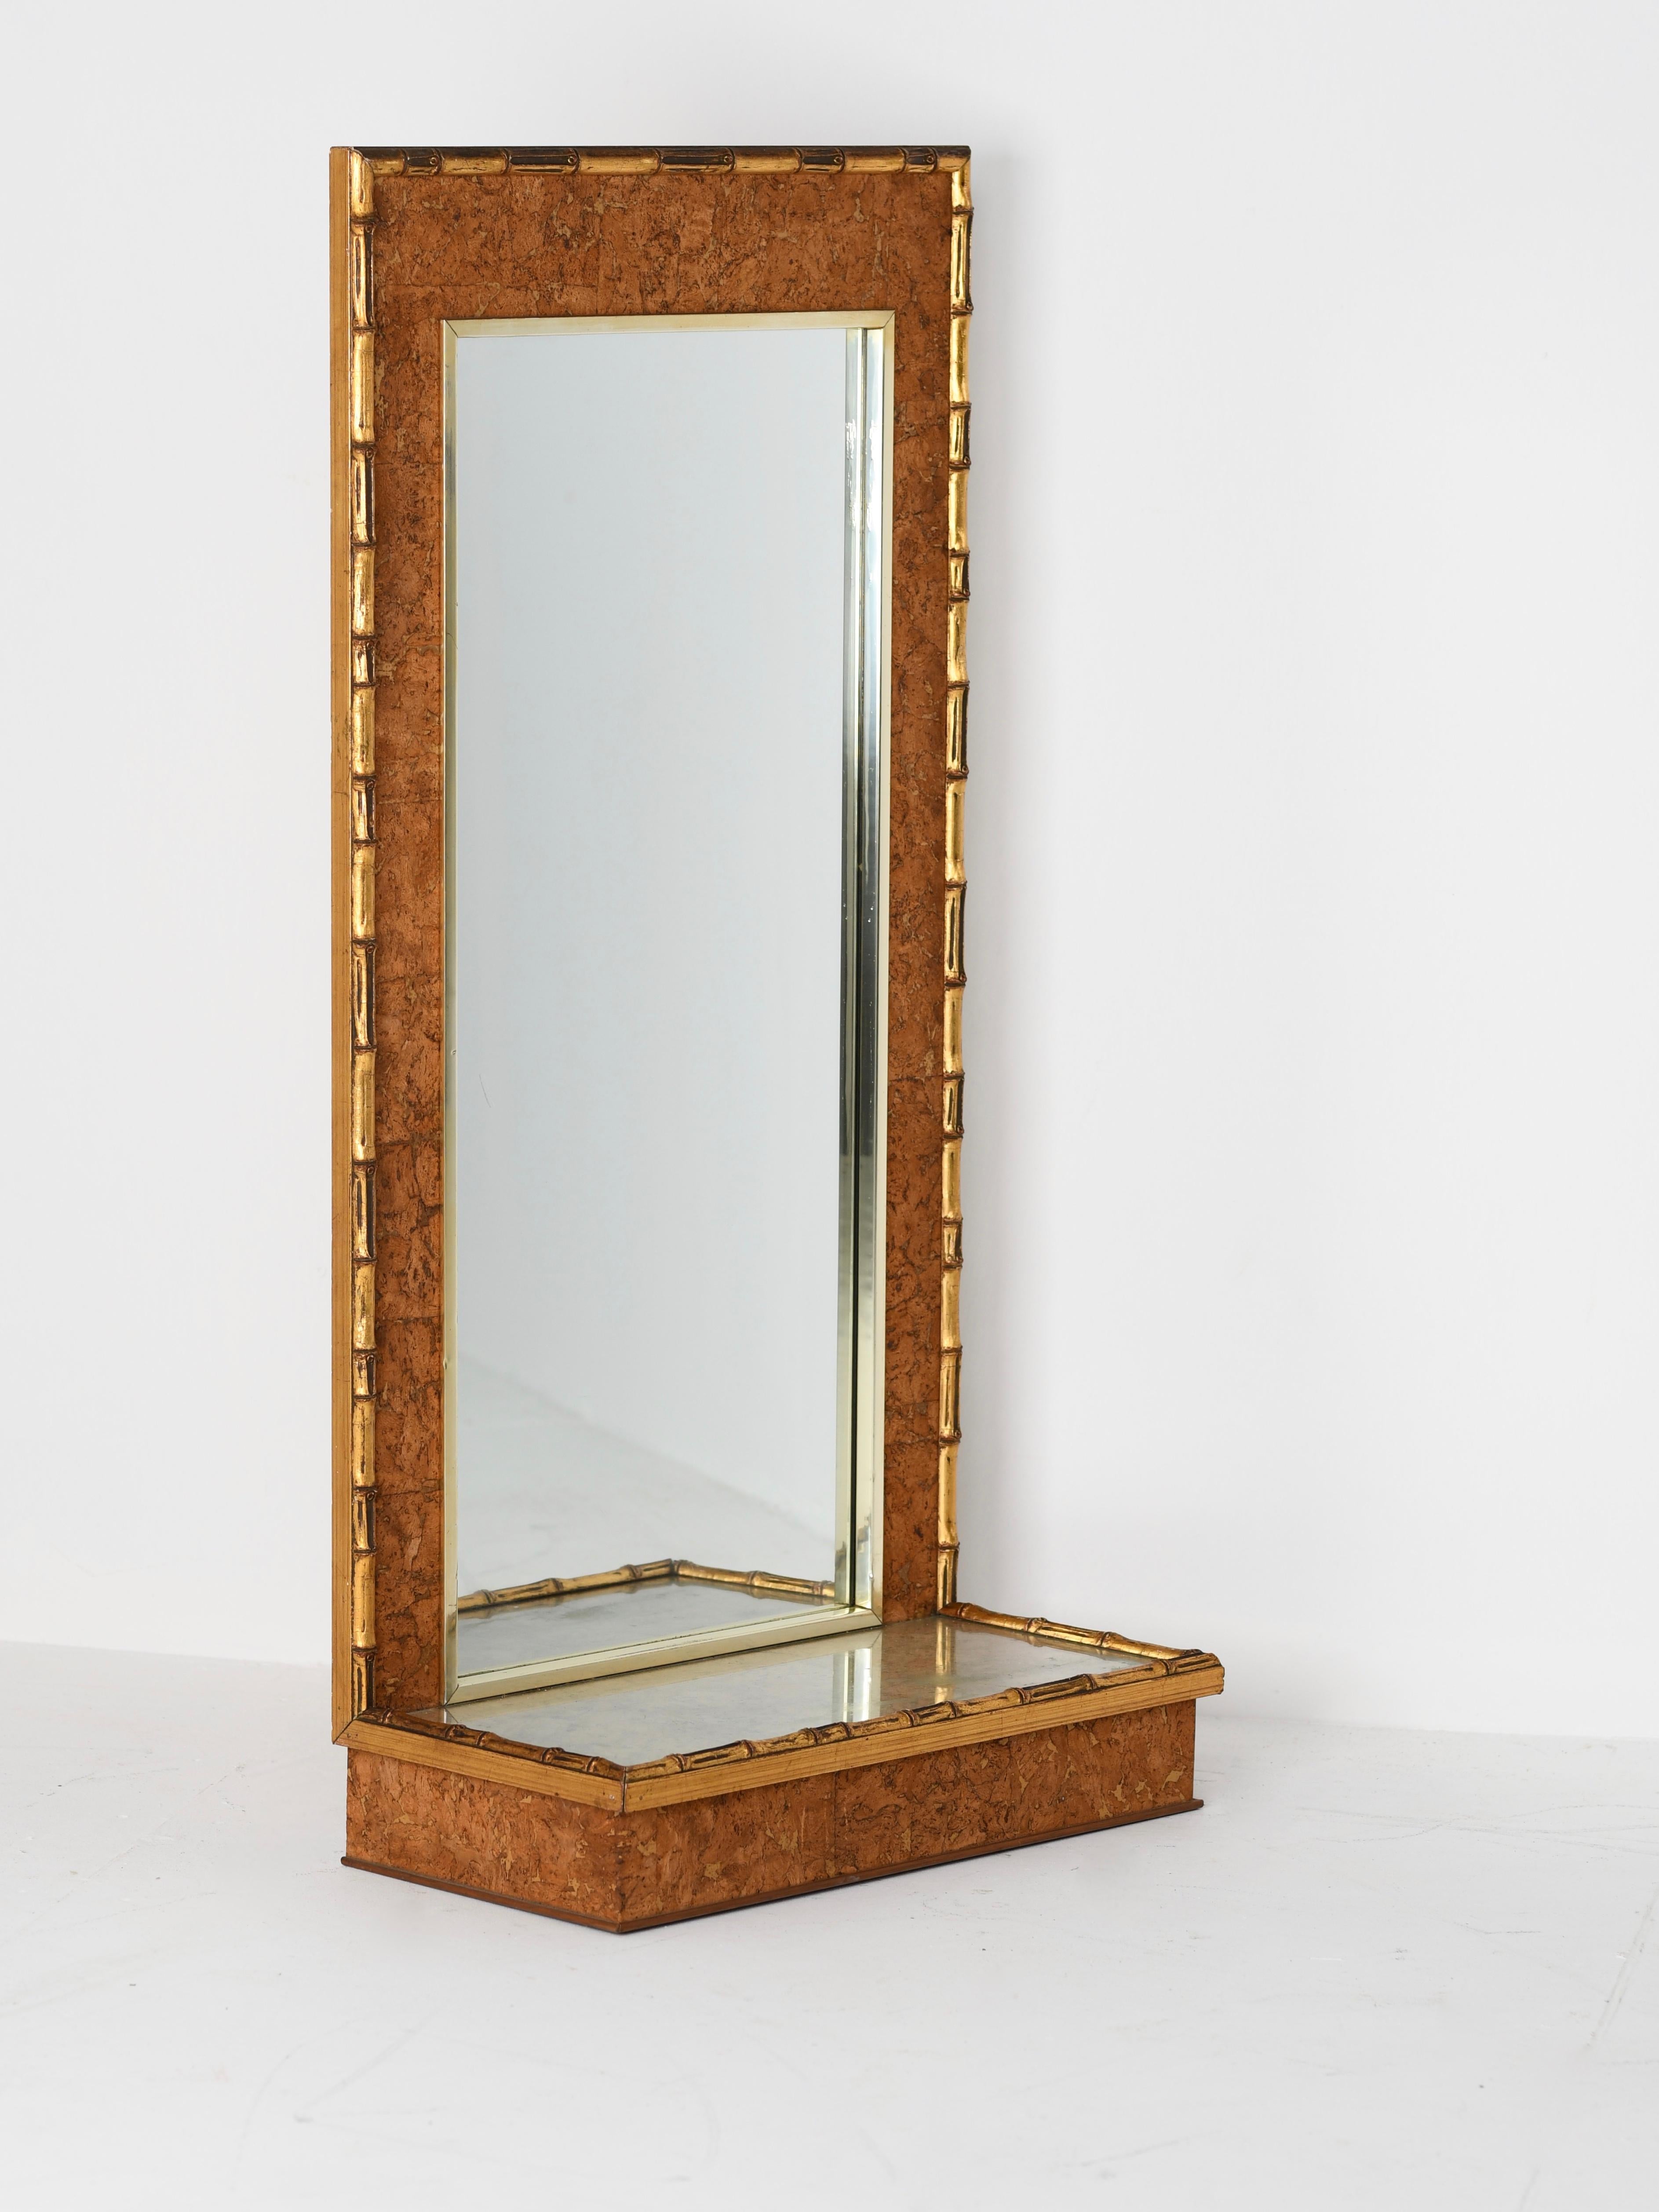 1970s Italian faux gilt bamboo console or bedroom mirror with cork inserts in the Gabriella Crespi style.